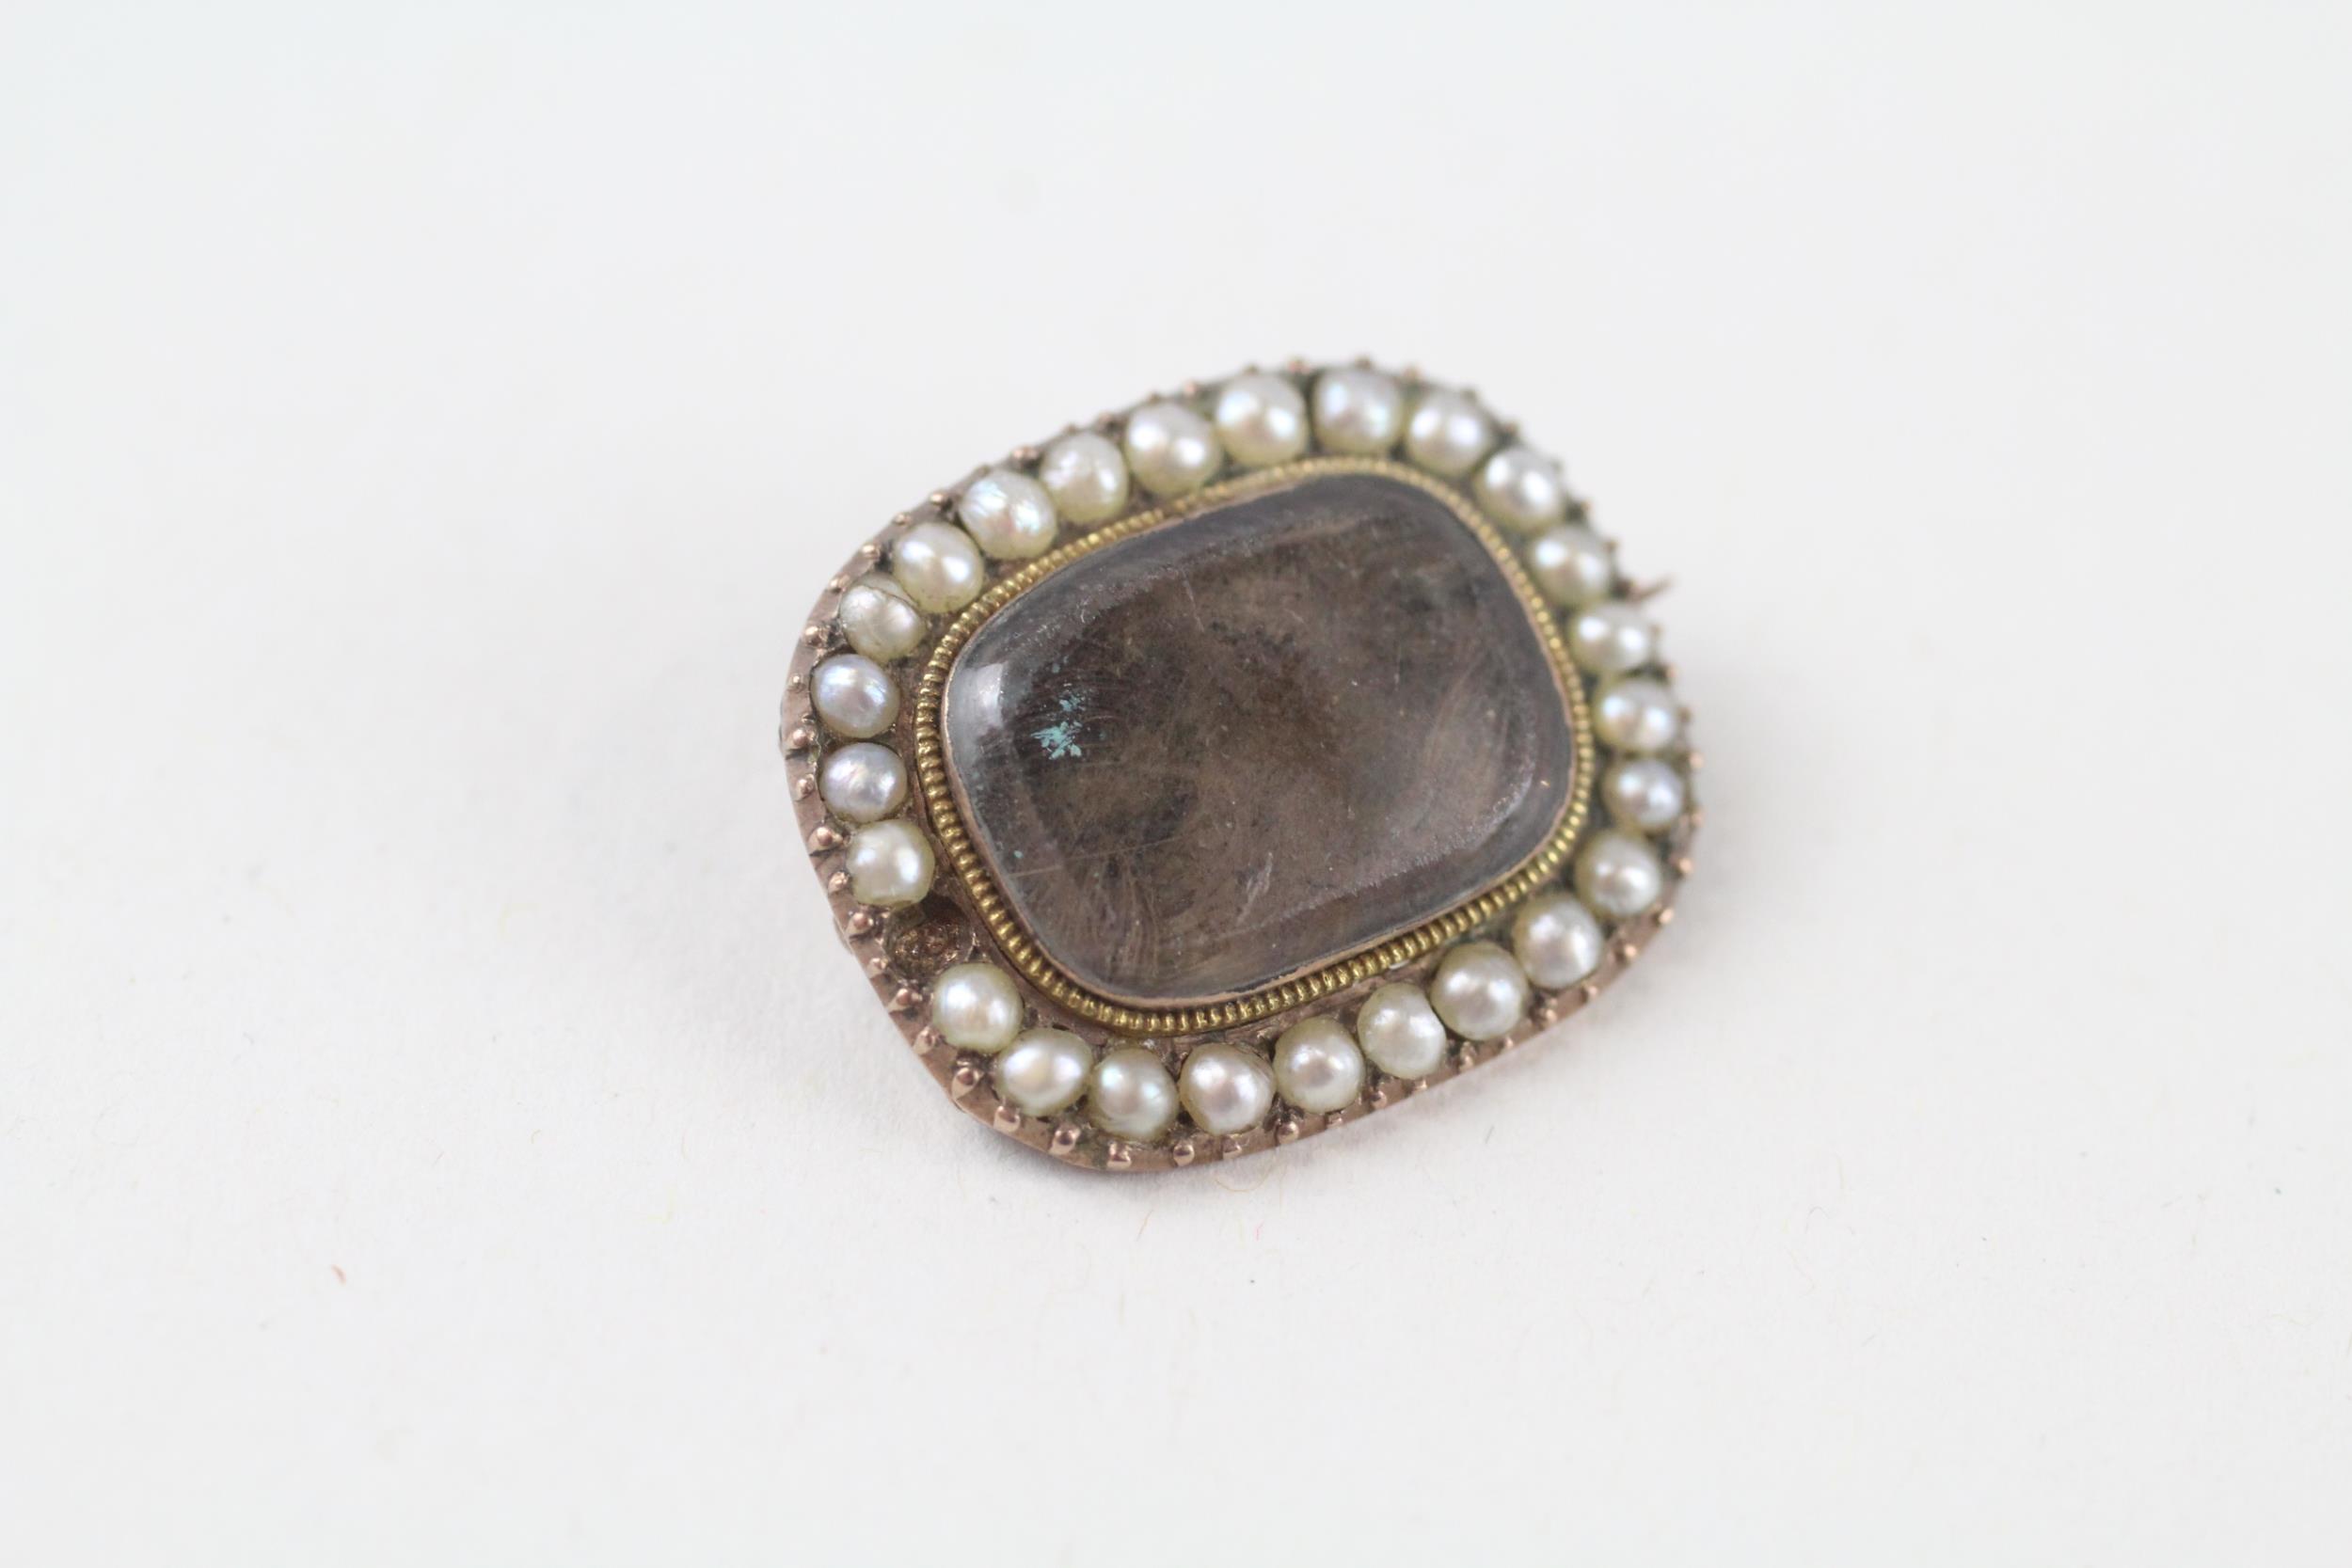 9ct gold antique seed pearl & hairwork mourning brooch with engraved initials, as seen (2.4g) - Image 3 of 4